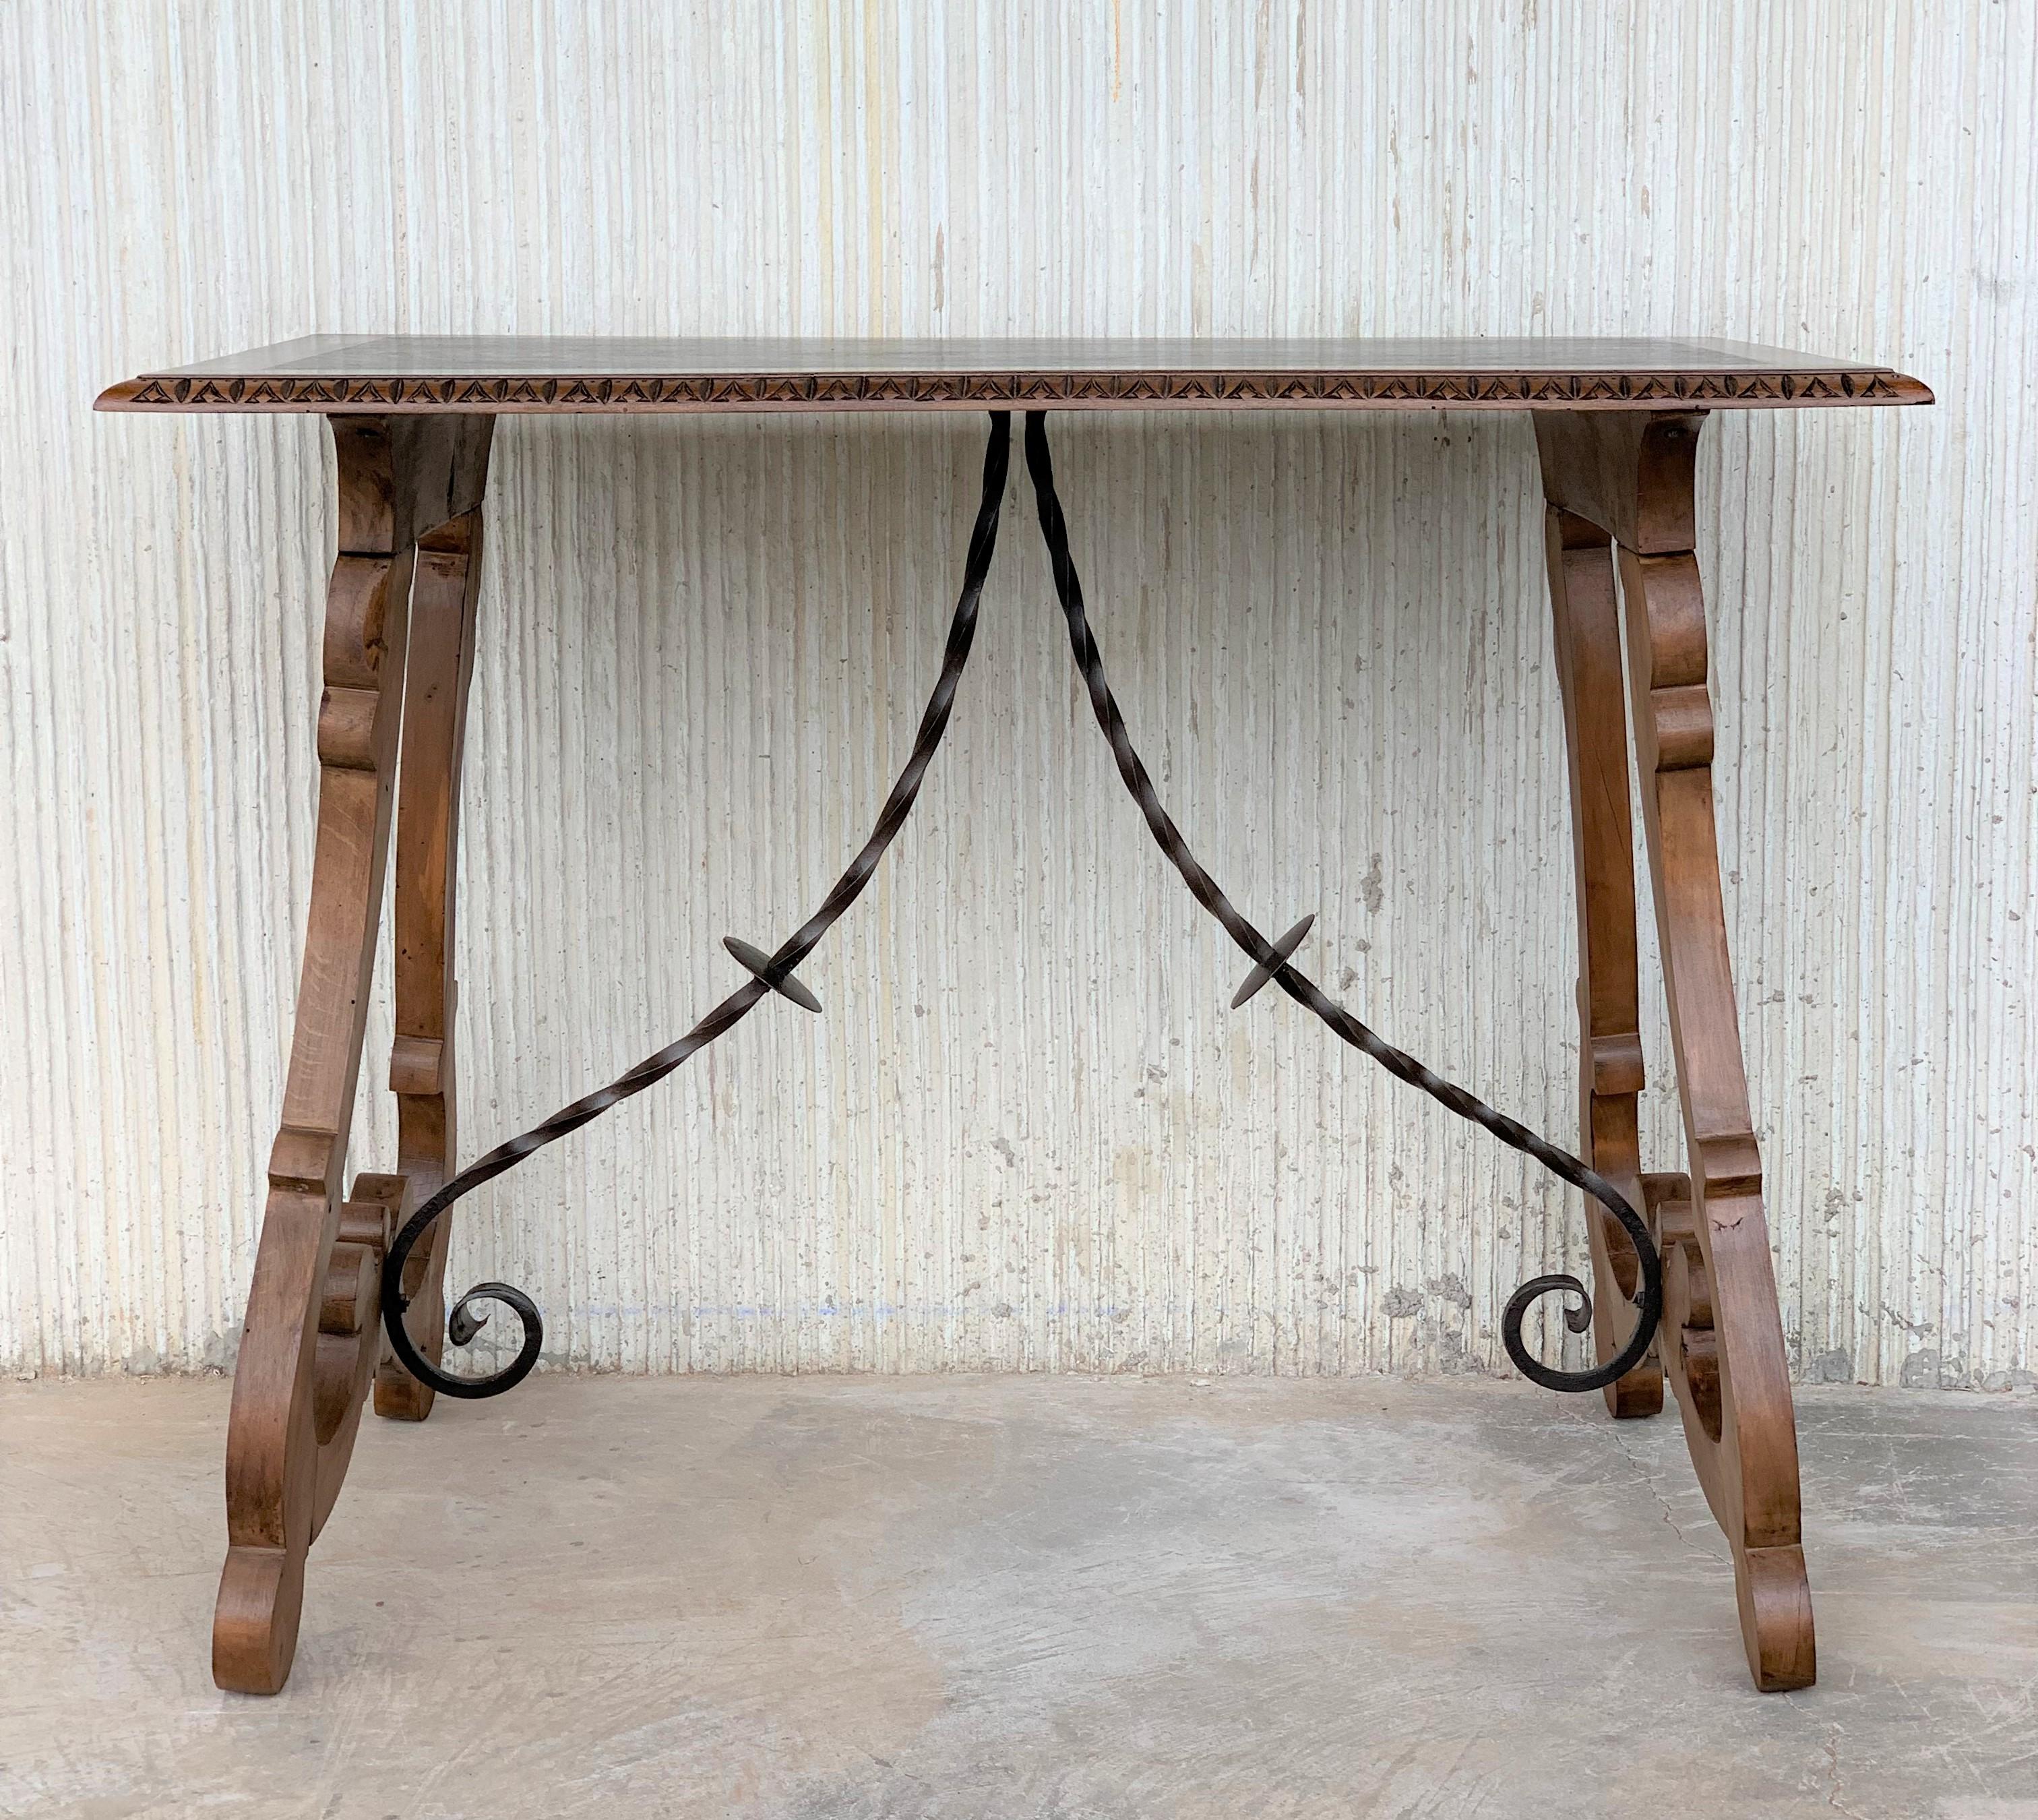 19th century Spanish farm table with iron stretchers
Hand carved top
Completely restored.